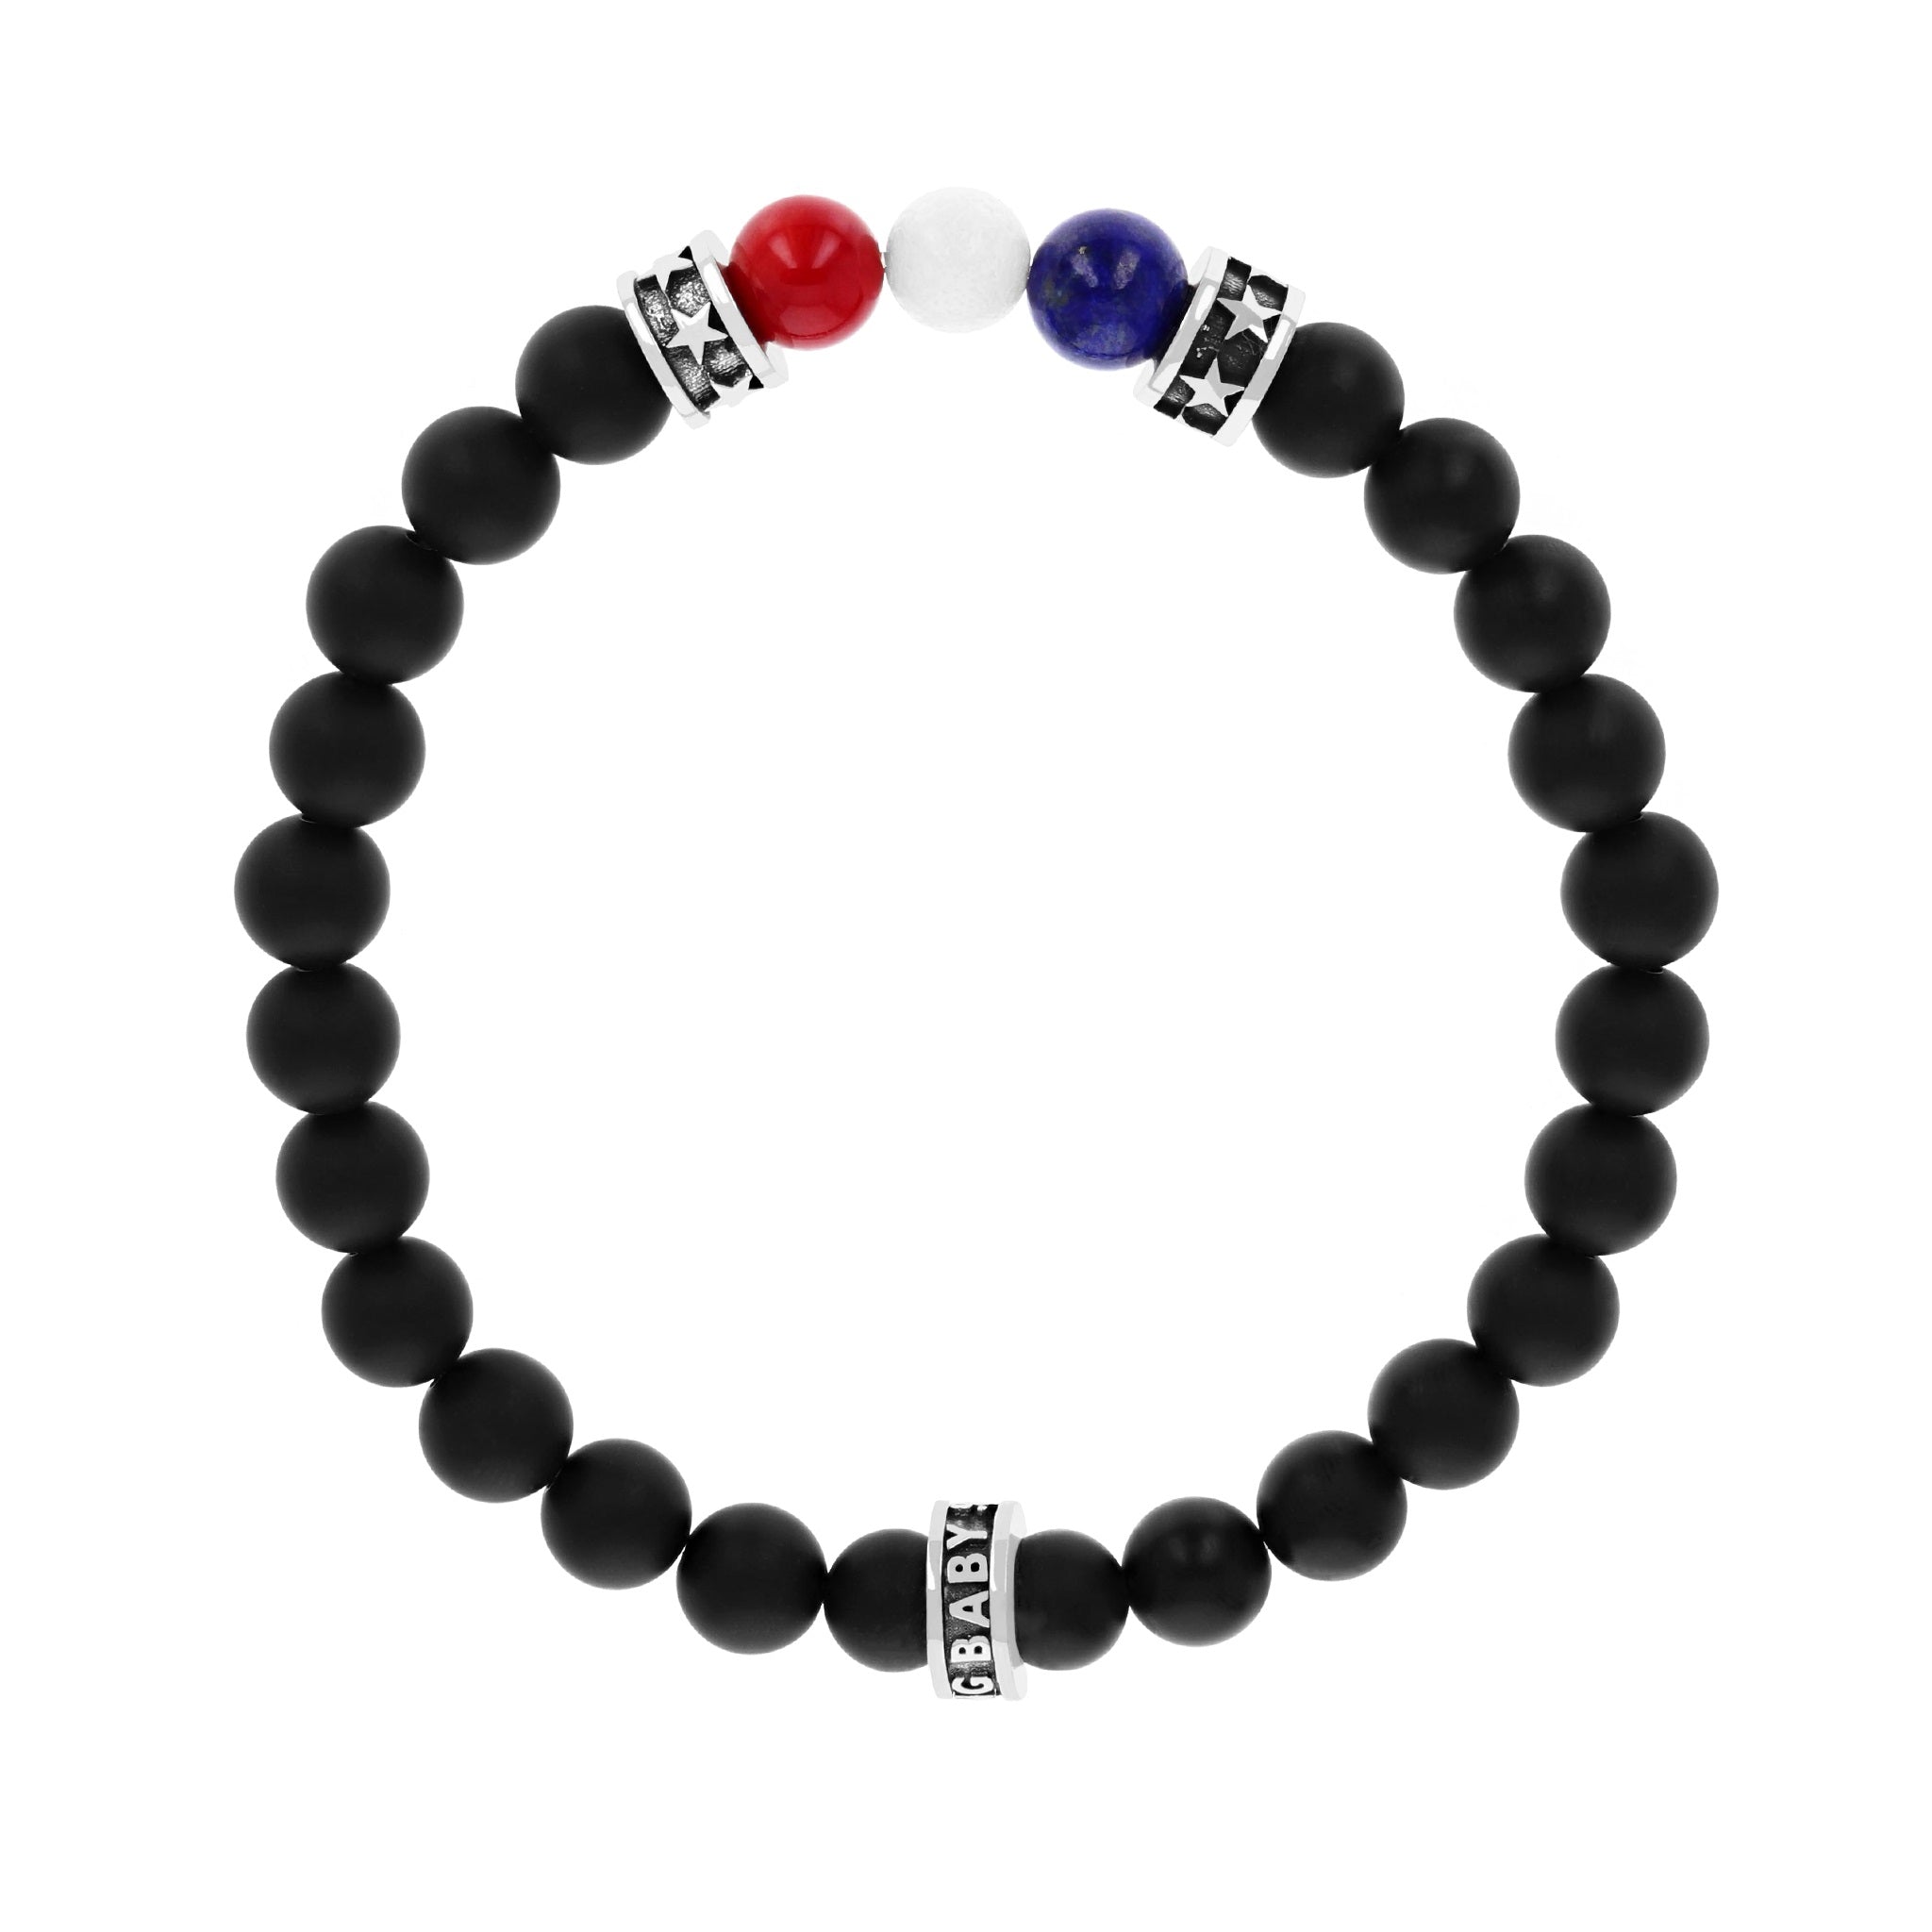 8mm Onyx Bead Bracelet w/ Lapis, White Coral, and Red Coral Beads and 2 Stars Rings